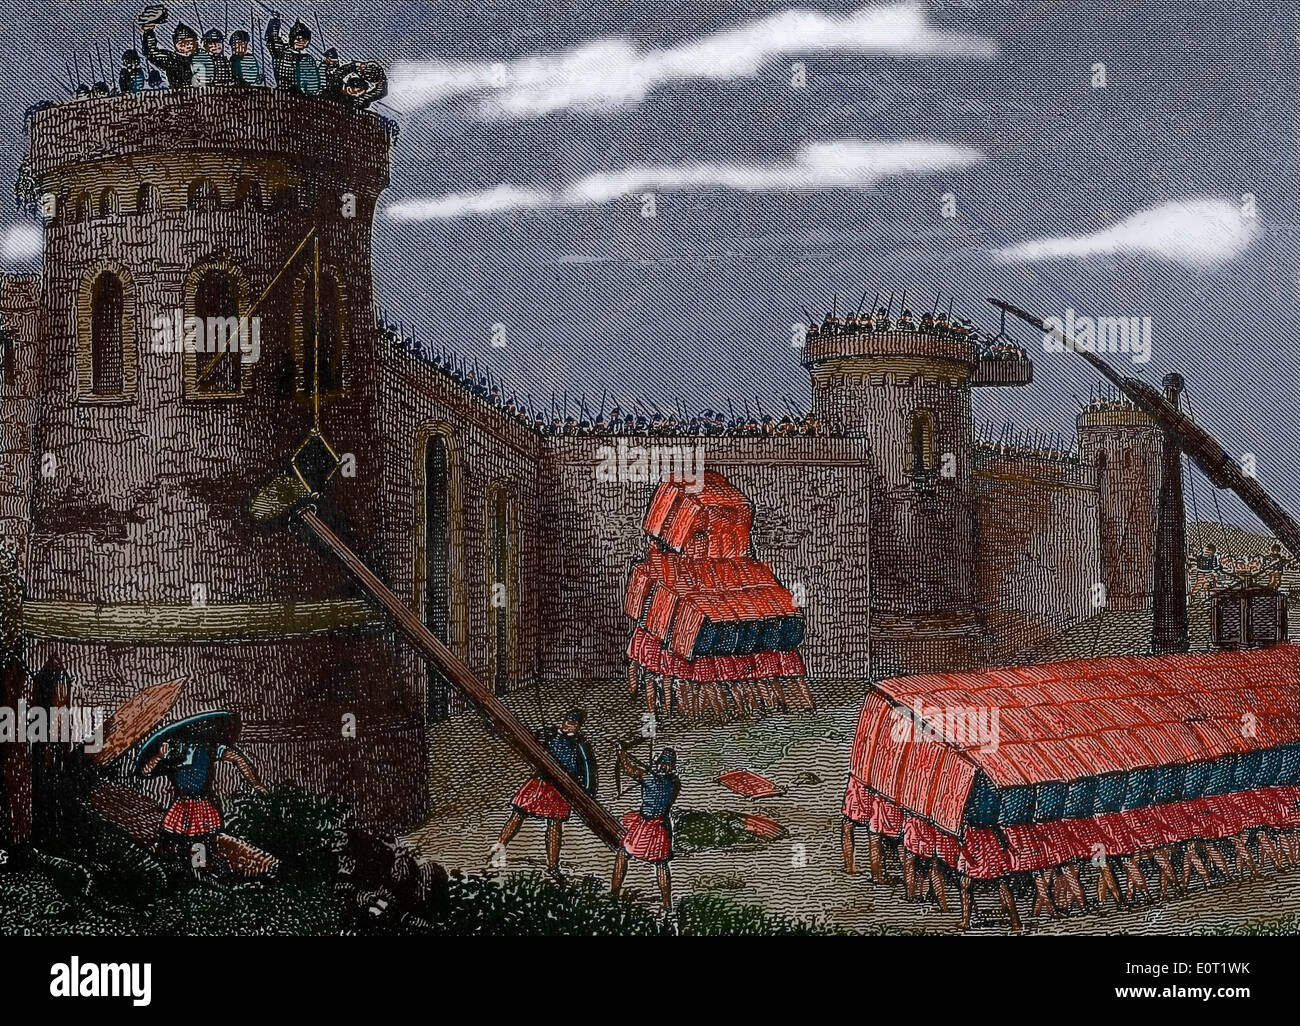 Roman Empire. Siege engine. Battering ram and testudo formation. Engraving (Later colouration) Stock Photo